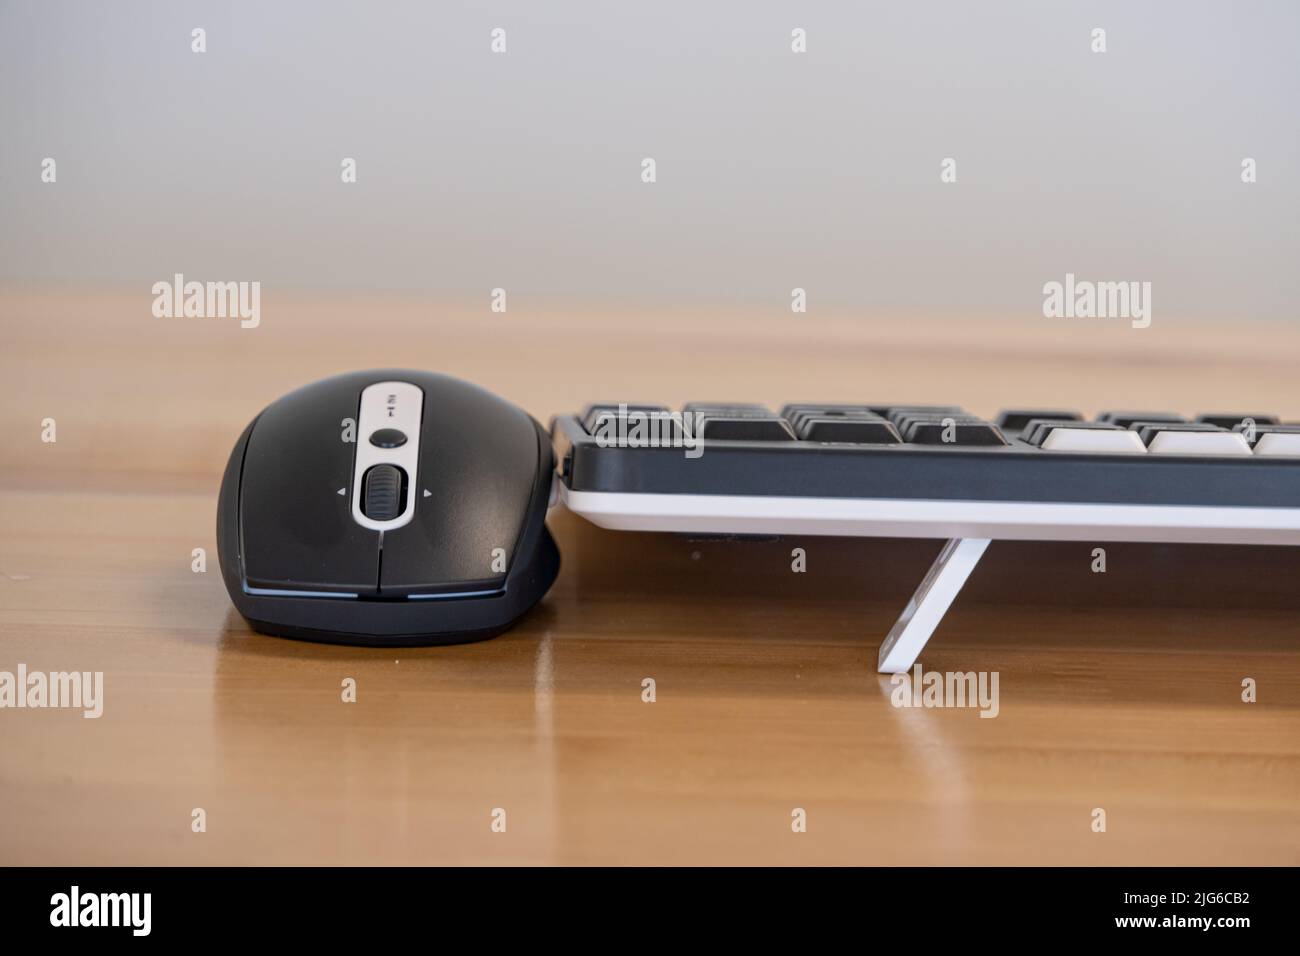 Computer keyboard and mouse on the desk close up. Stock Photo